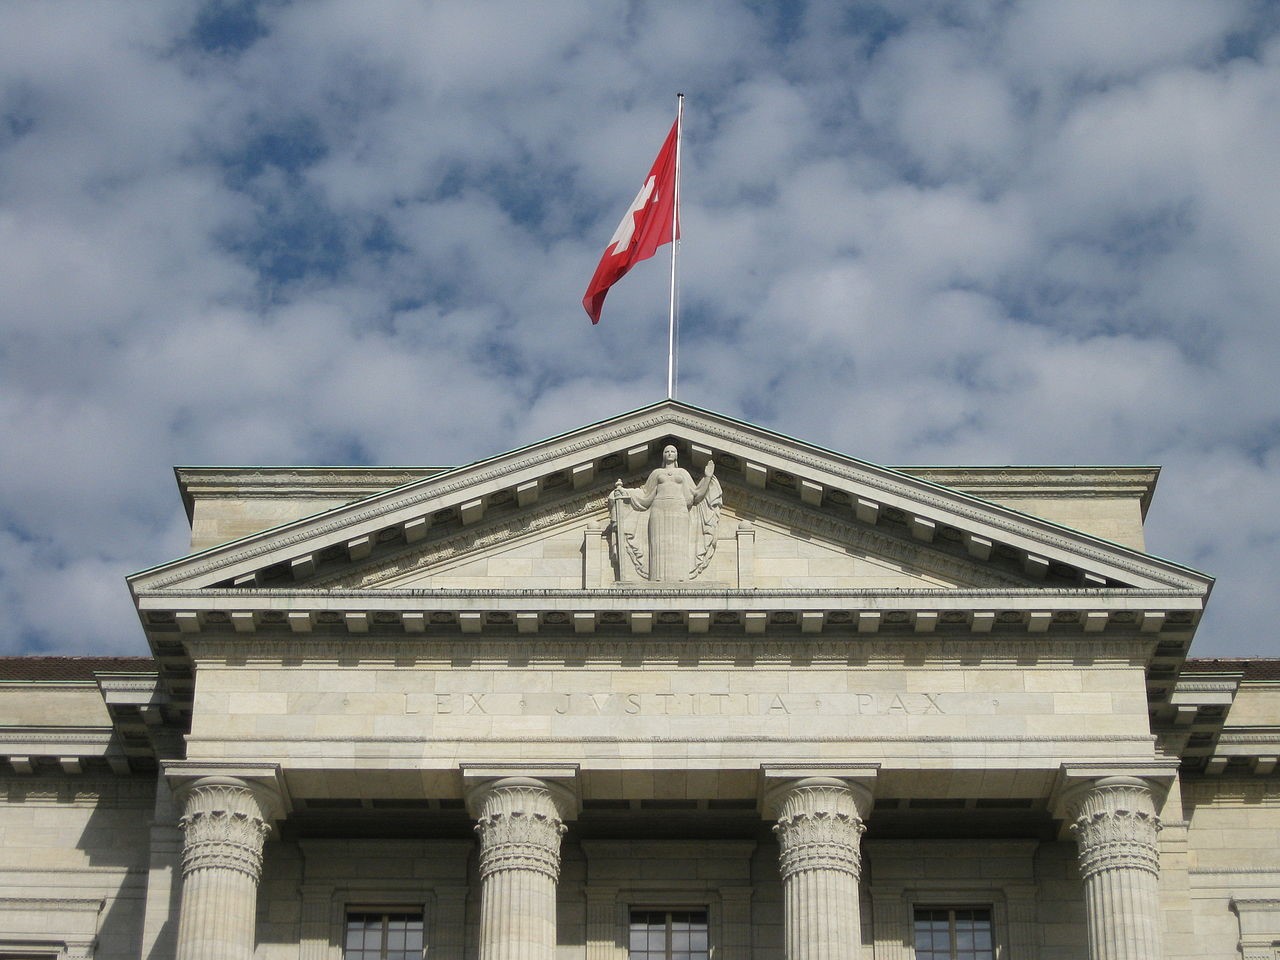 Switzerland has decided to uphold a ban on access to offshore gambling sites